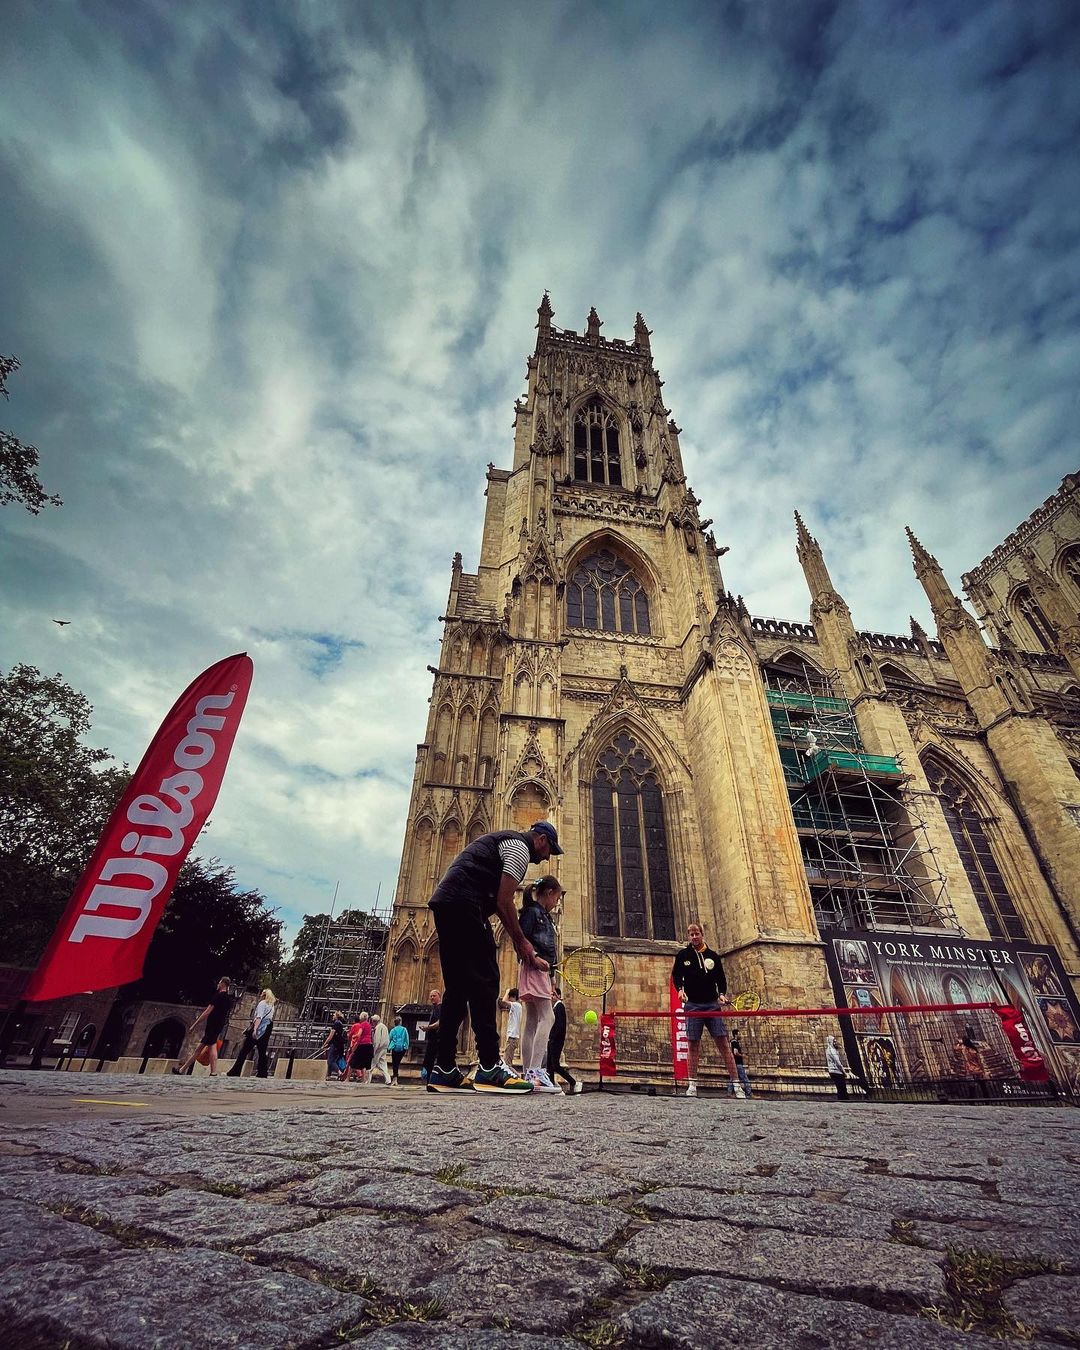 The team get people to play a game of tennis outside York Minster cathedral.